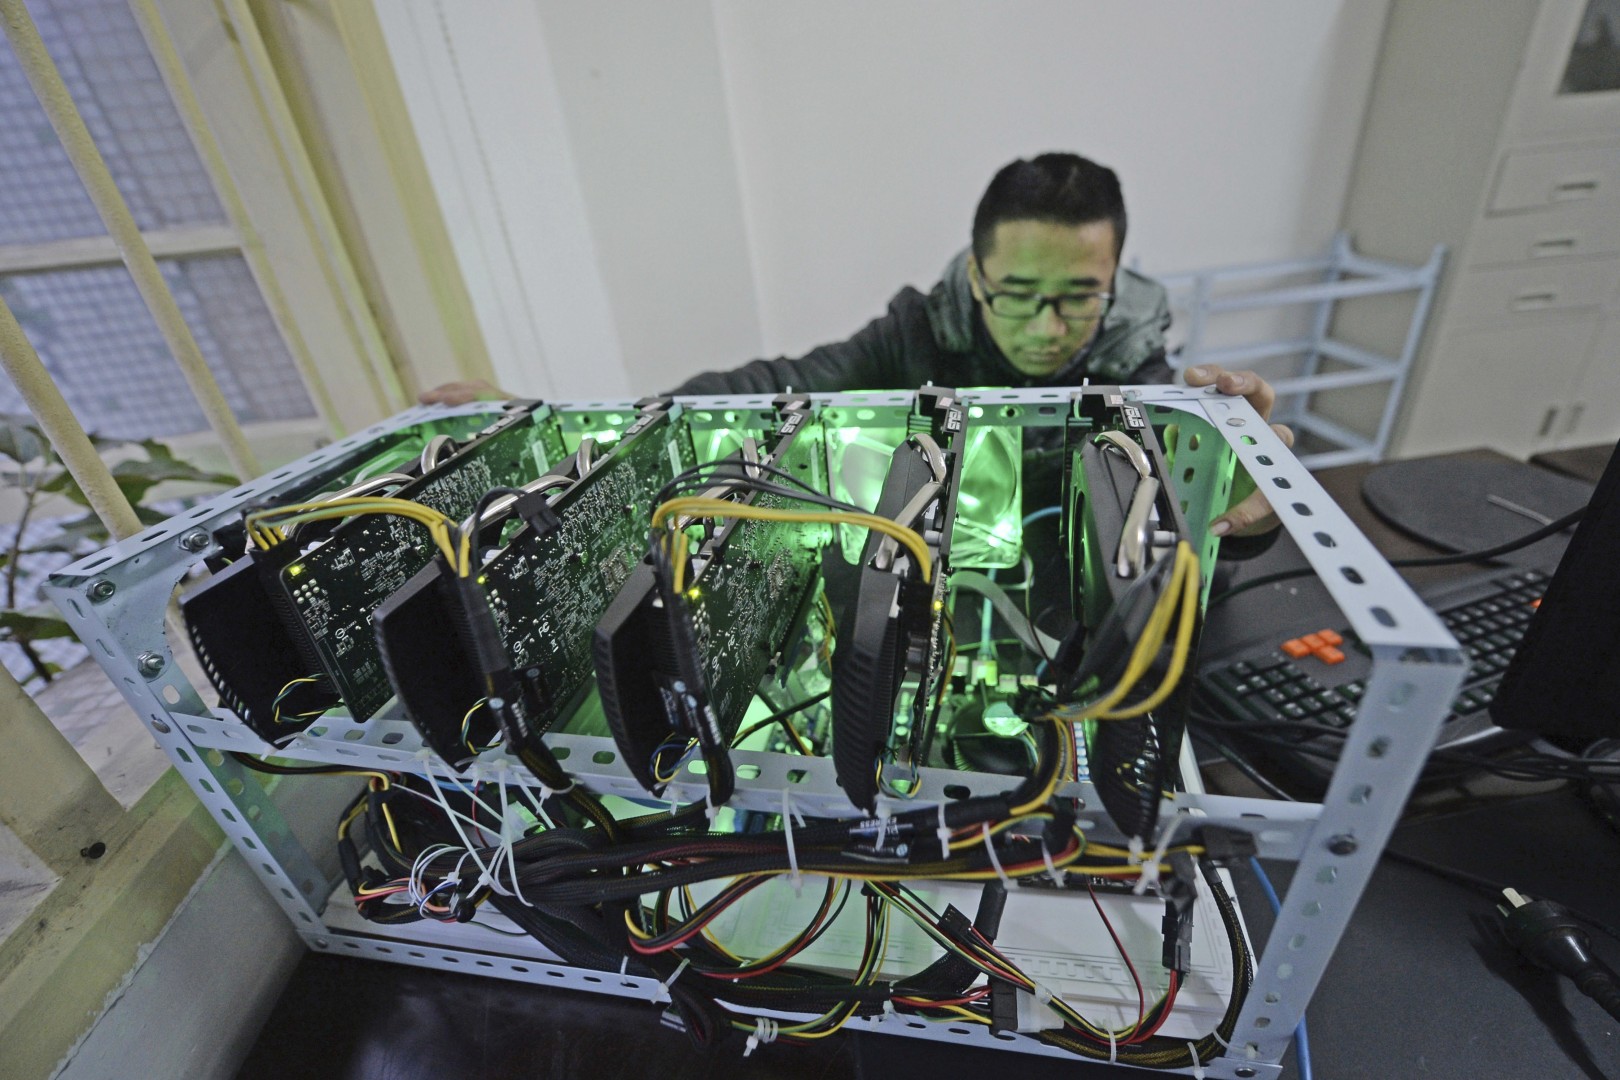 Buy computer for bitcoin mining